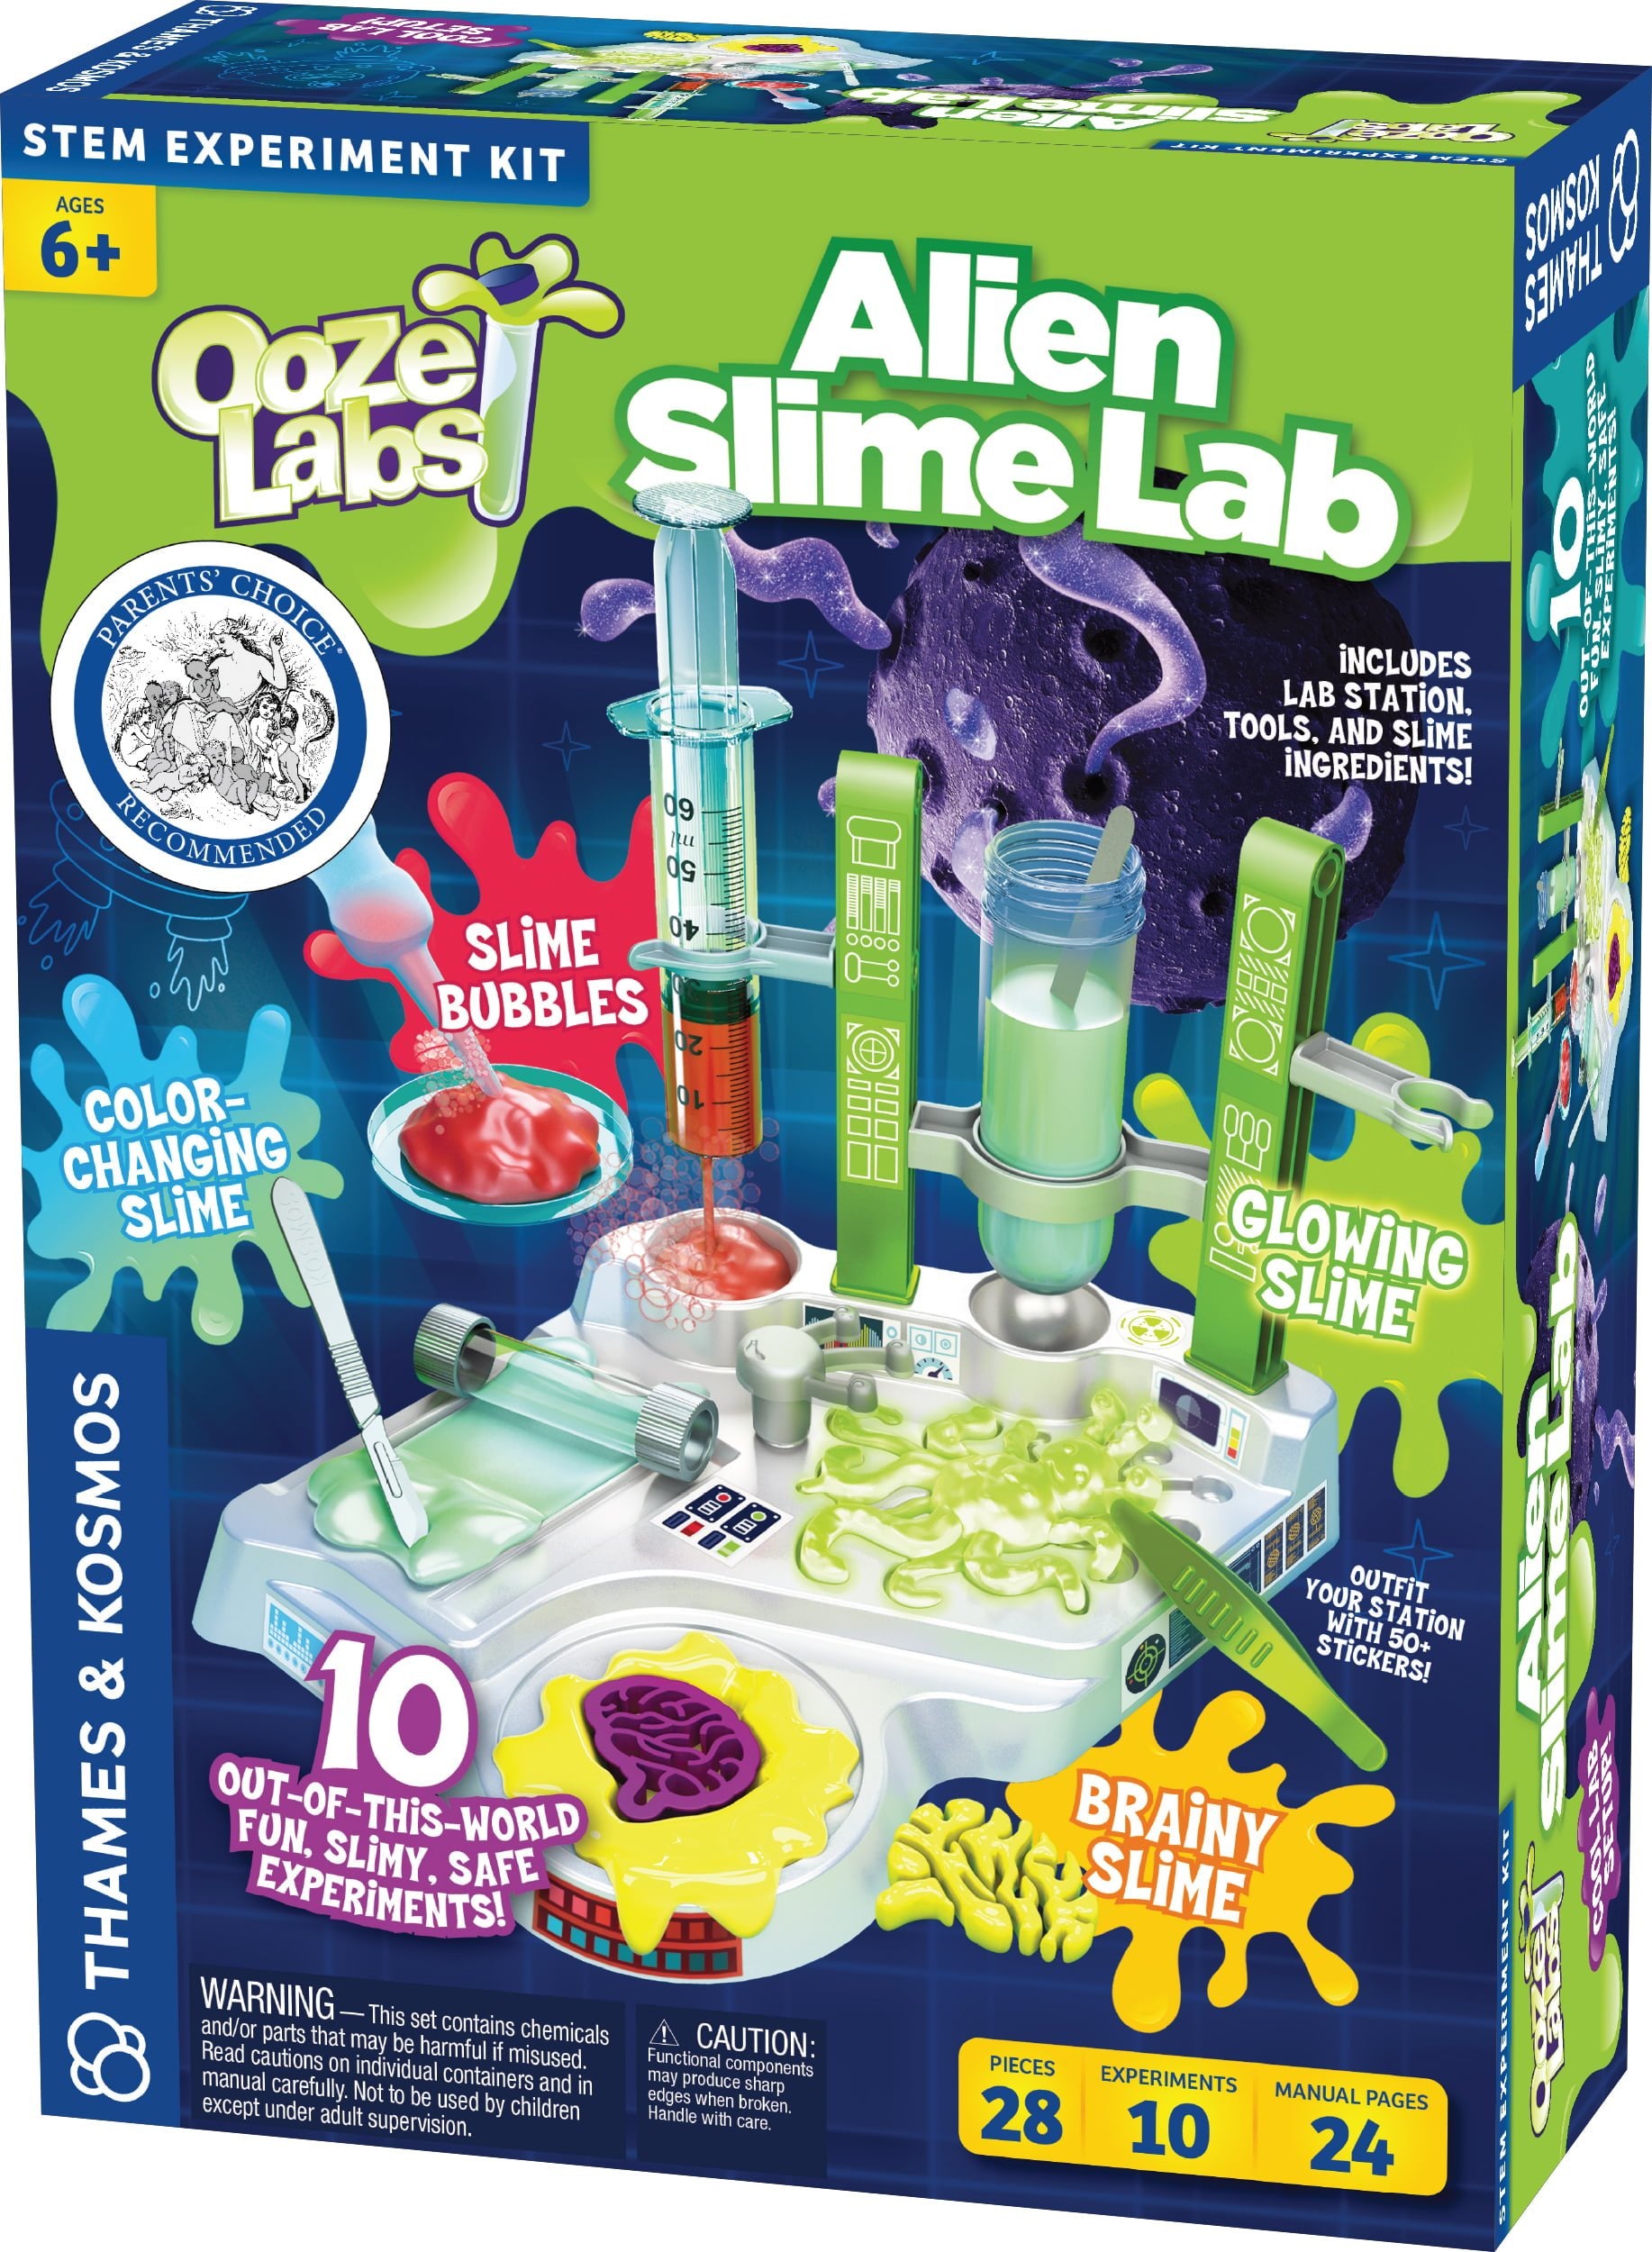 Thames and Kosmos - Ooze Labs Alien Slime Lab - Science Kit